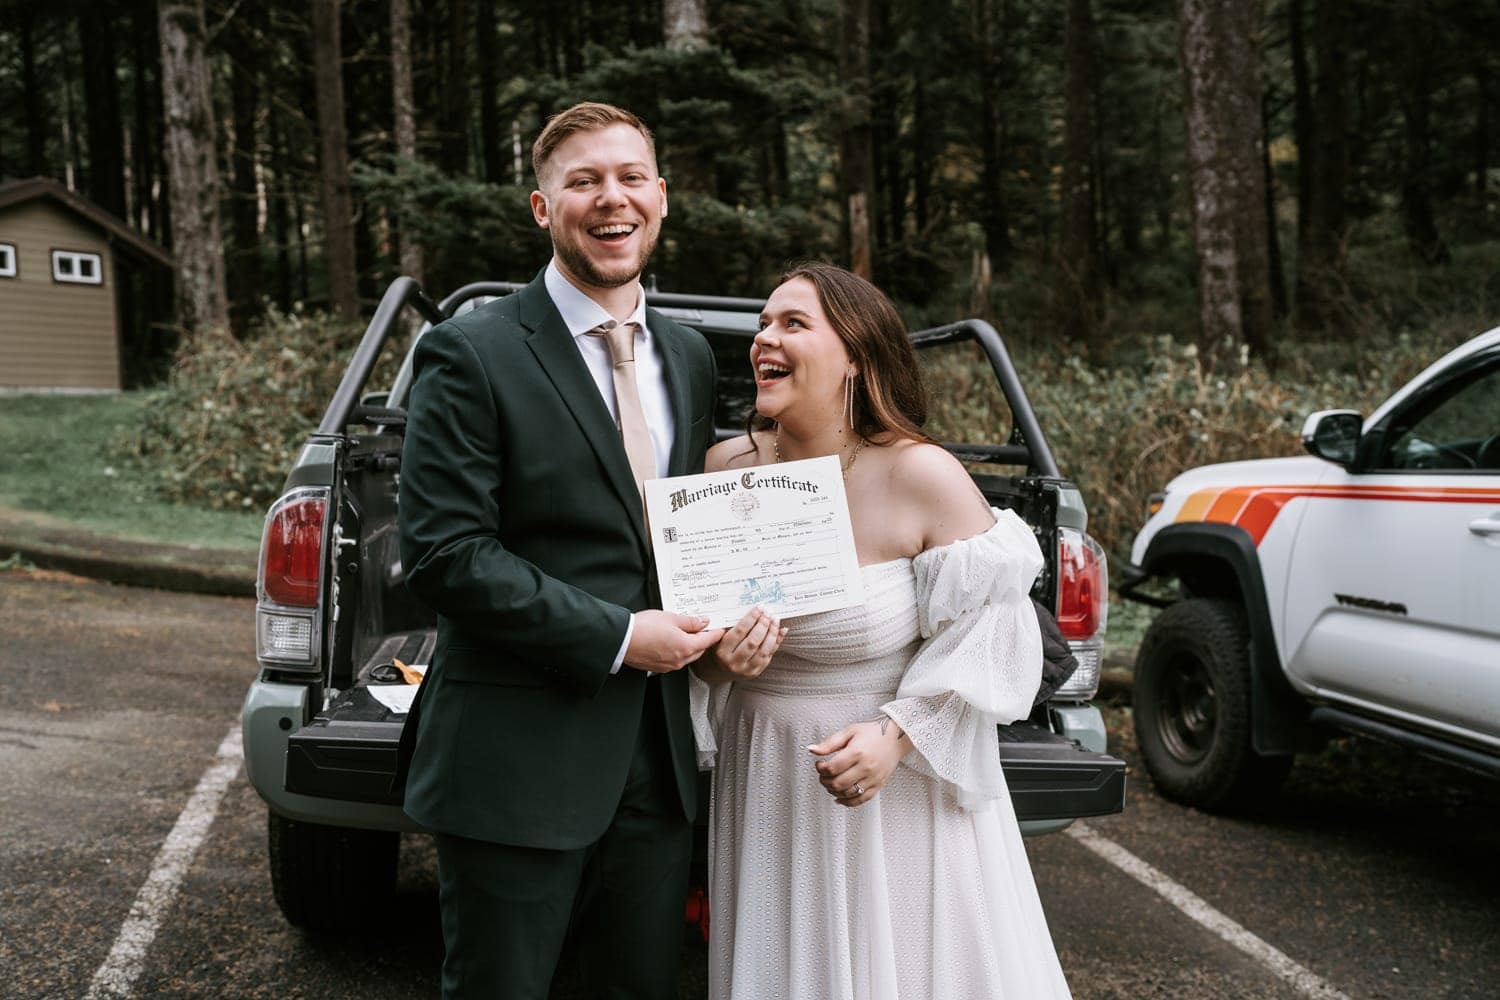 The wedding couple pose with their marriage license after getting married at Hug Point on the Oregon Coast.